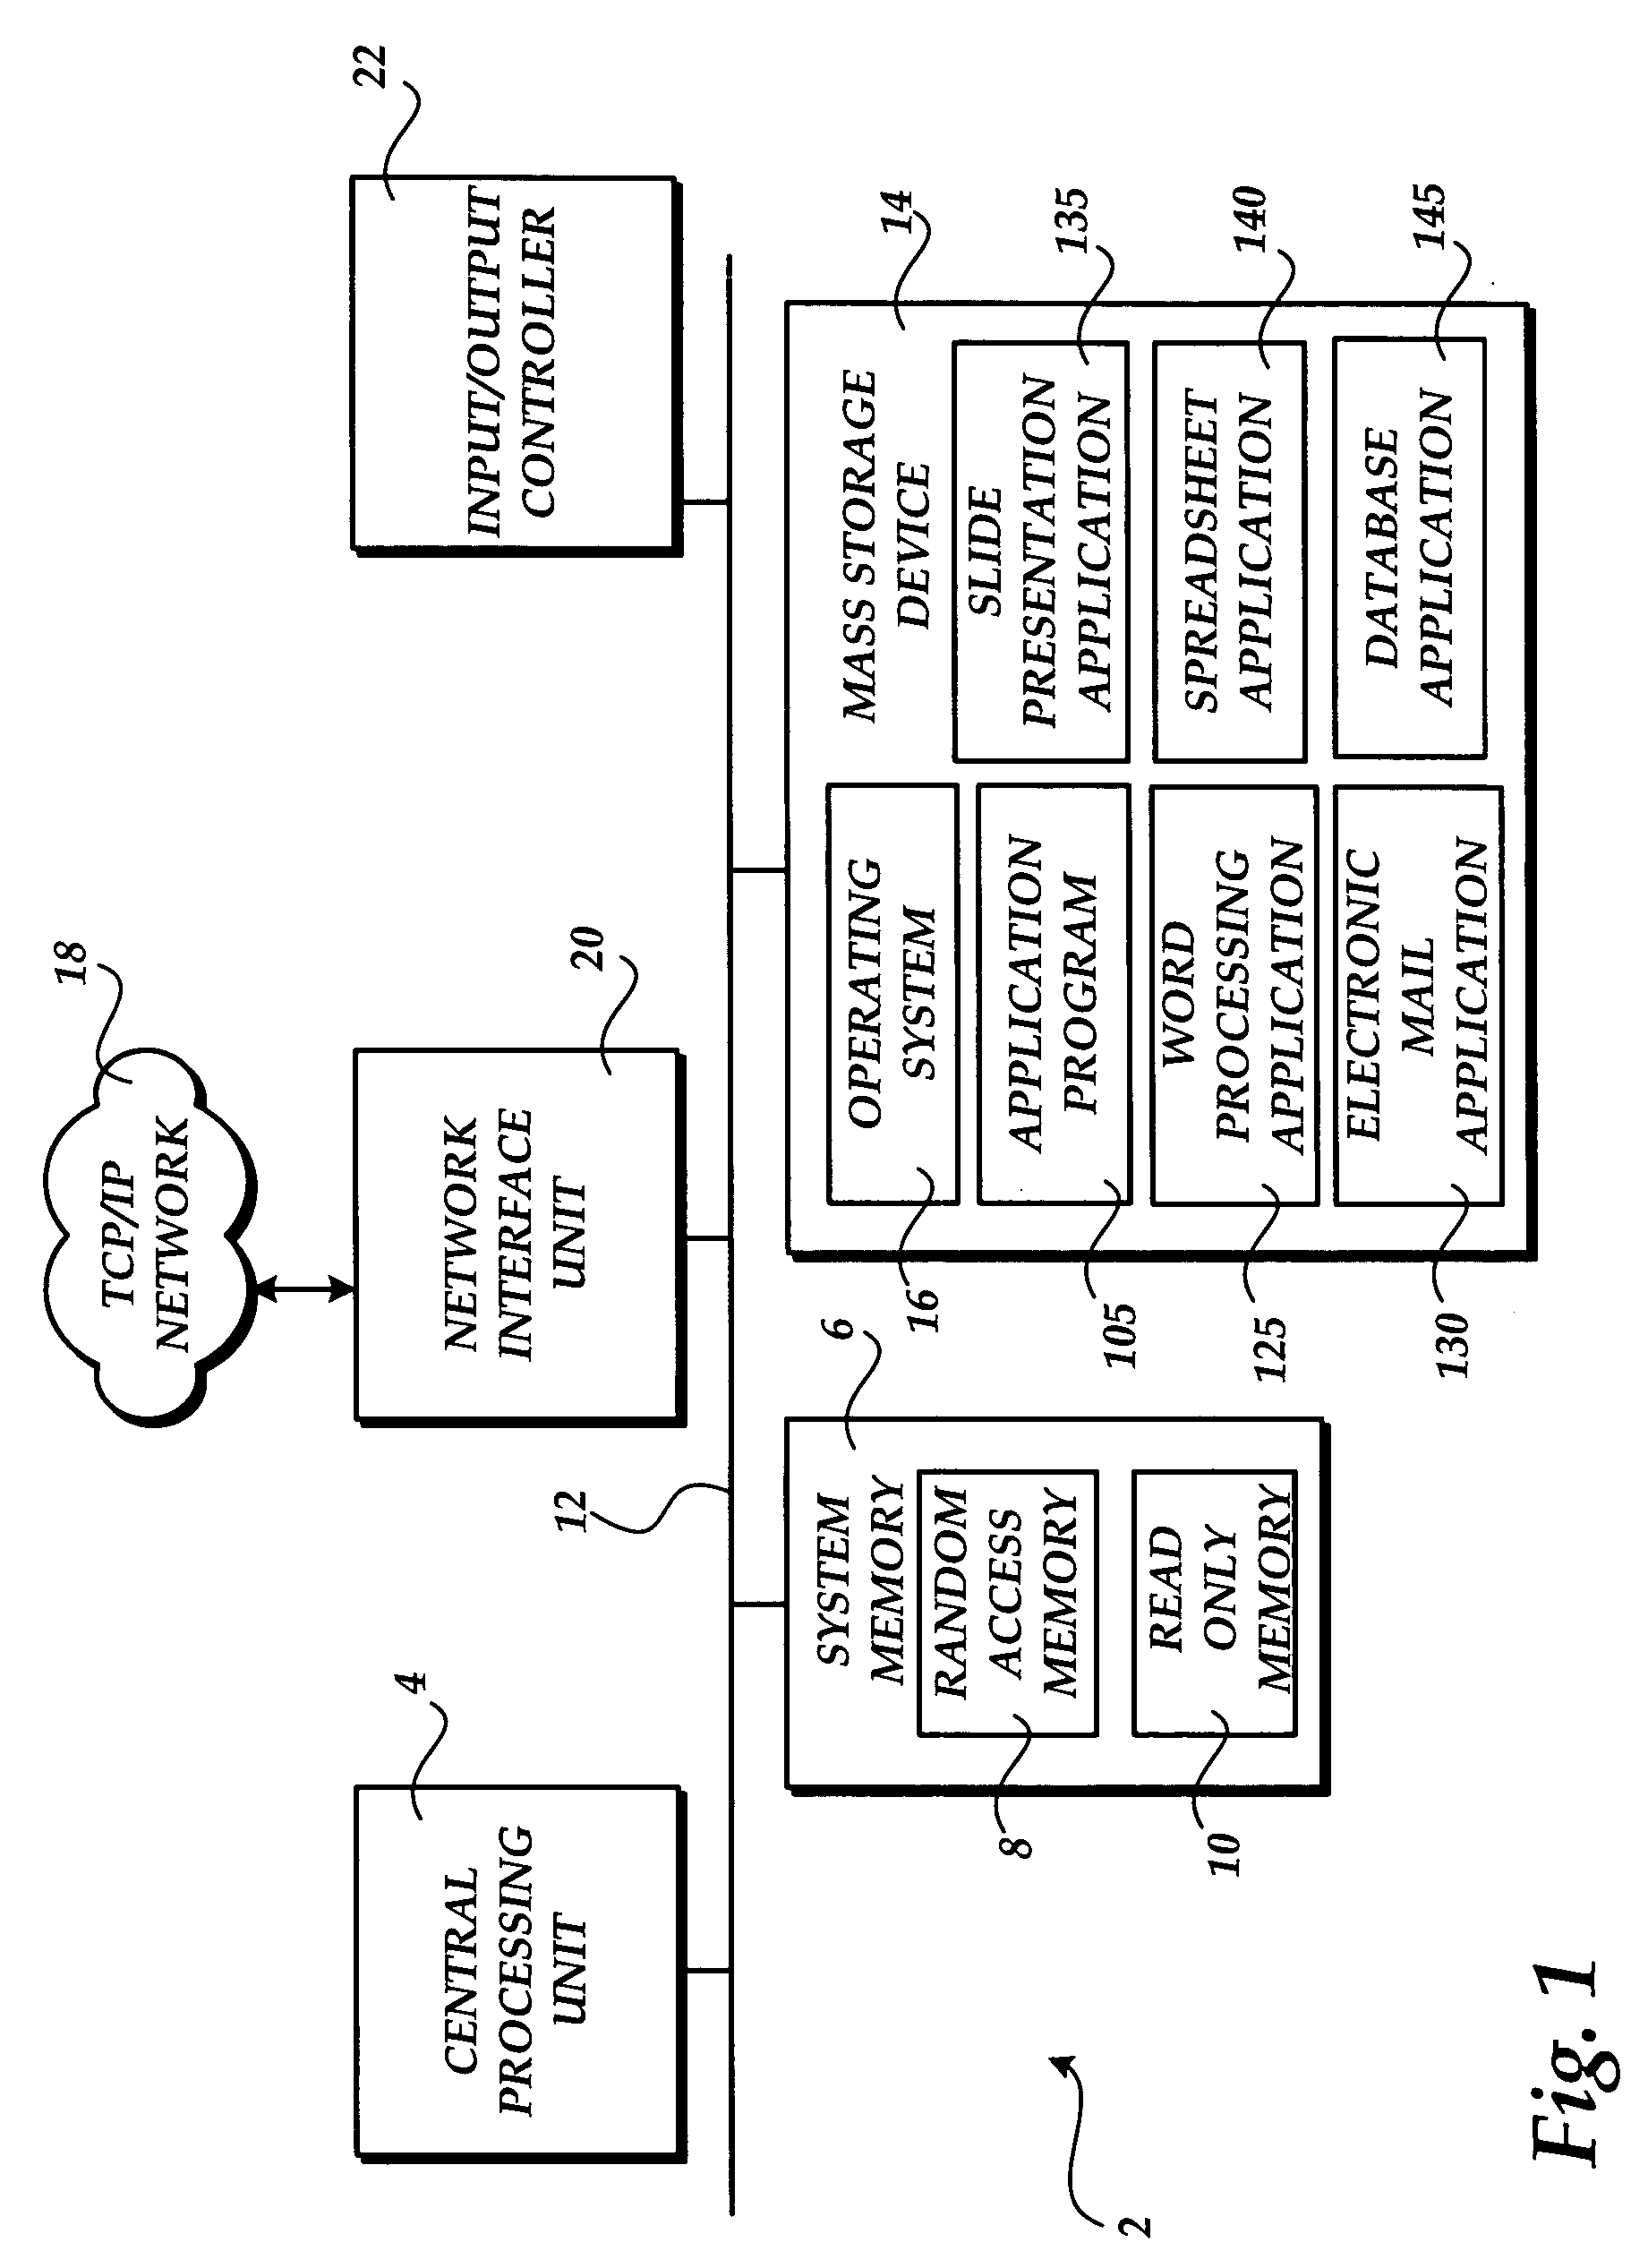 Method and system for managing personally identifiable information and sensitive information in an application-independent manner